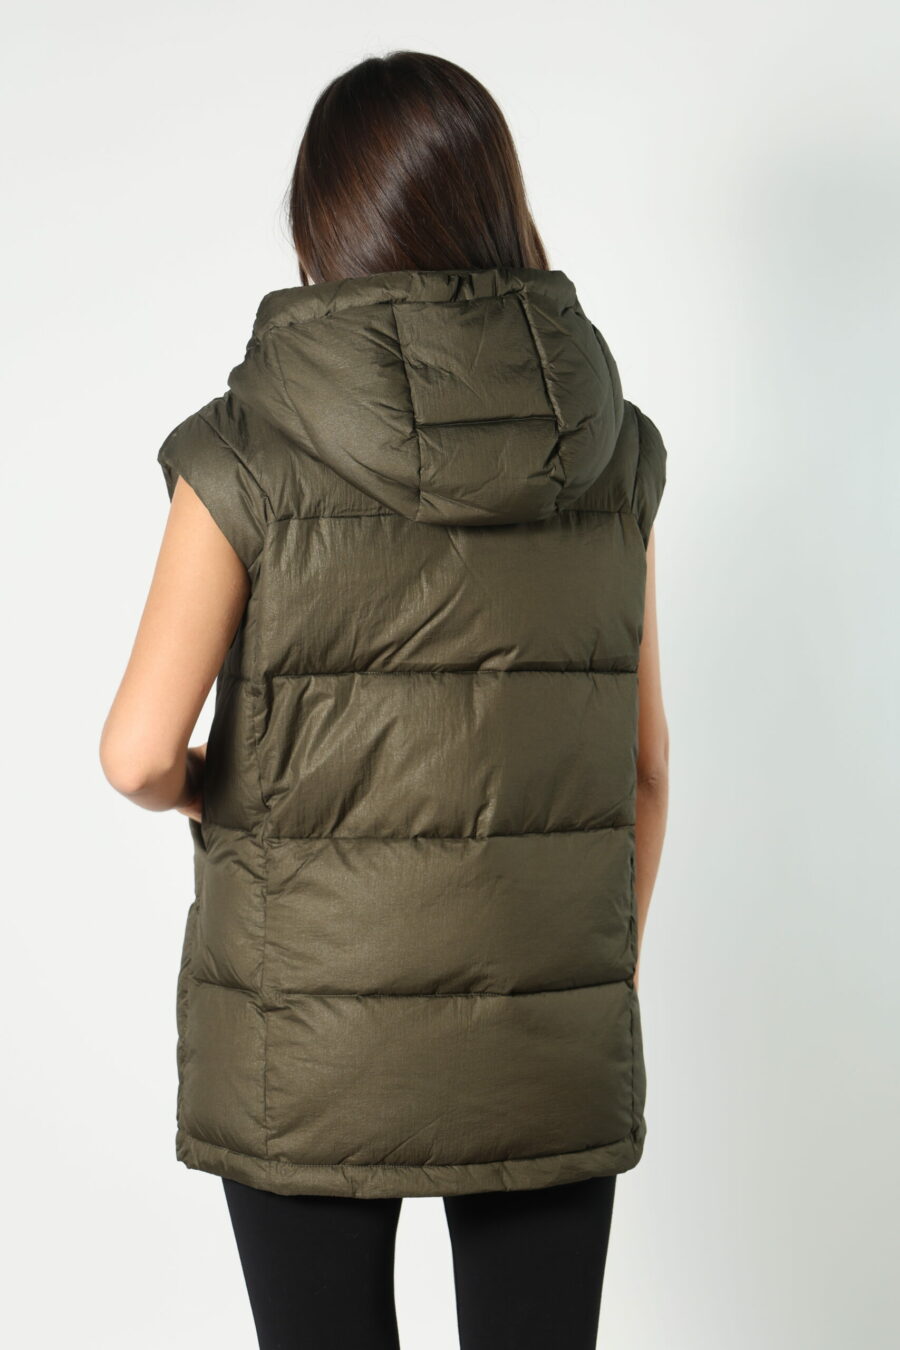 Dark green hooded waistcoat with diagonal lines - 8052865435499 293 scaled